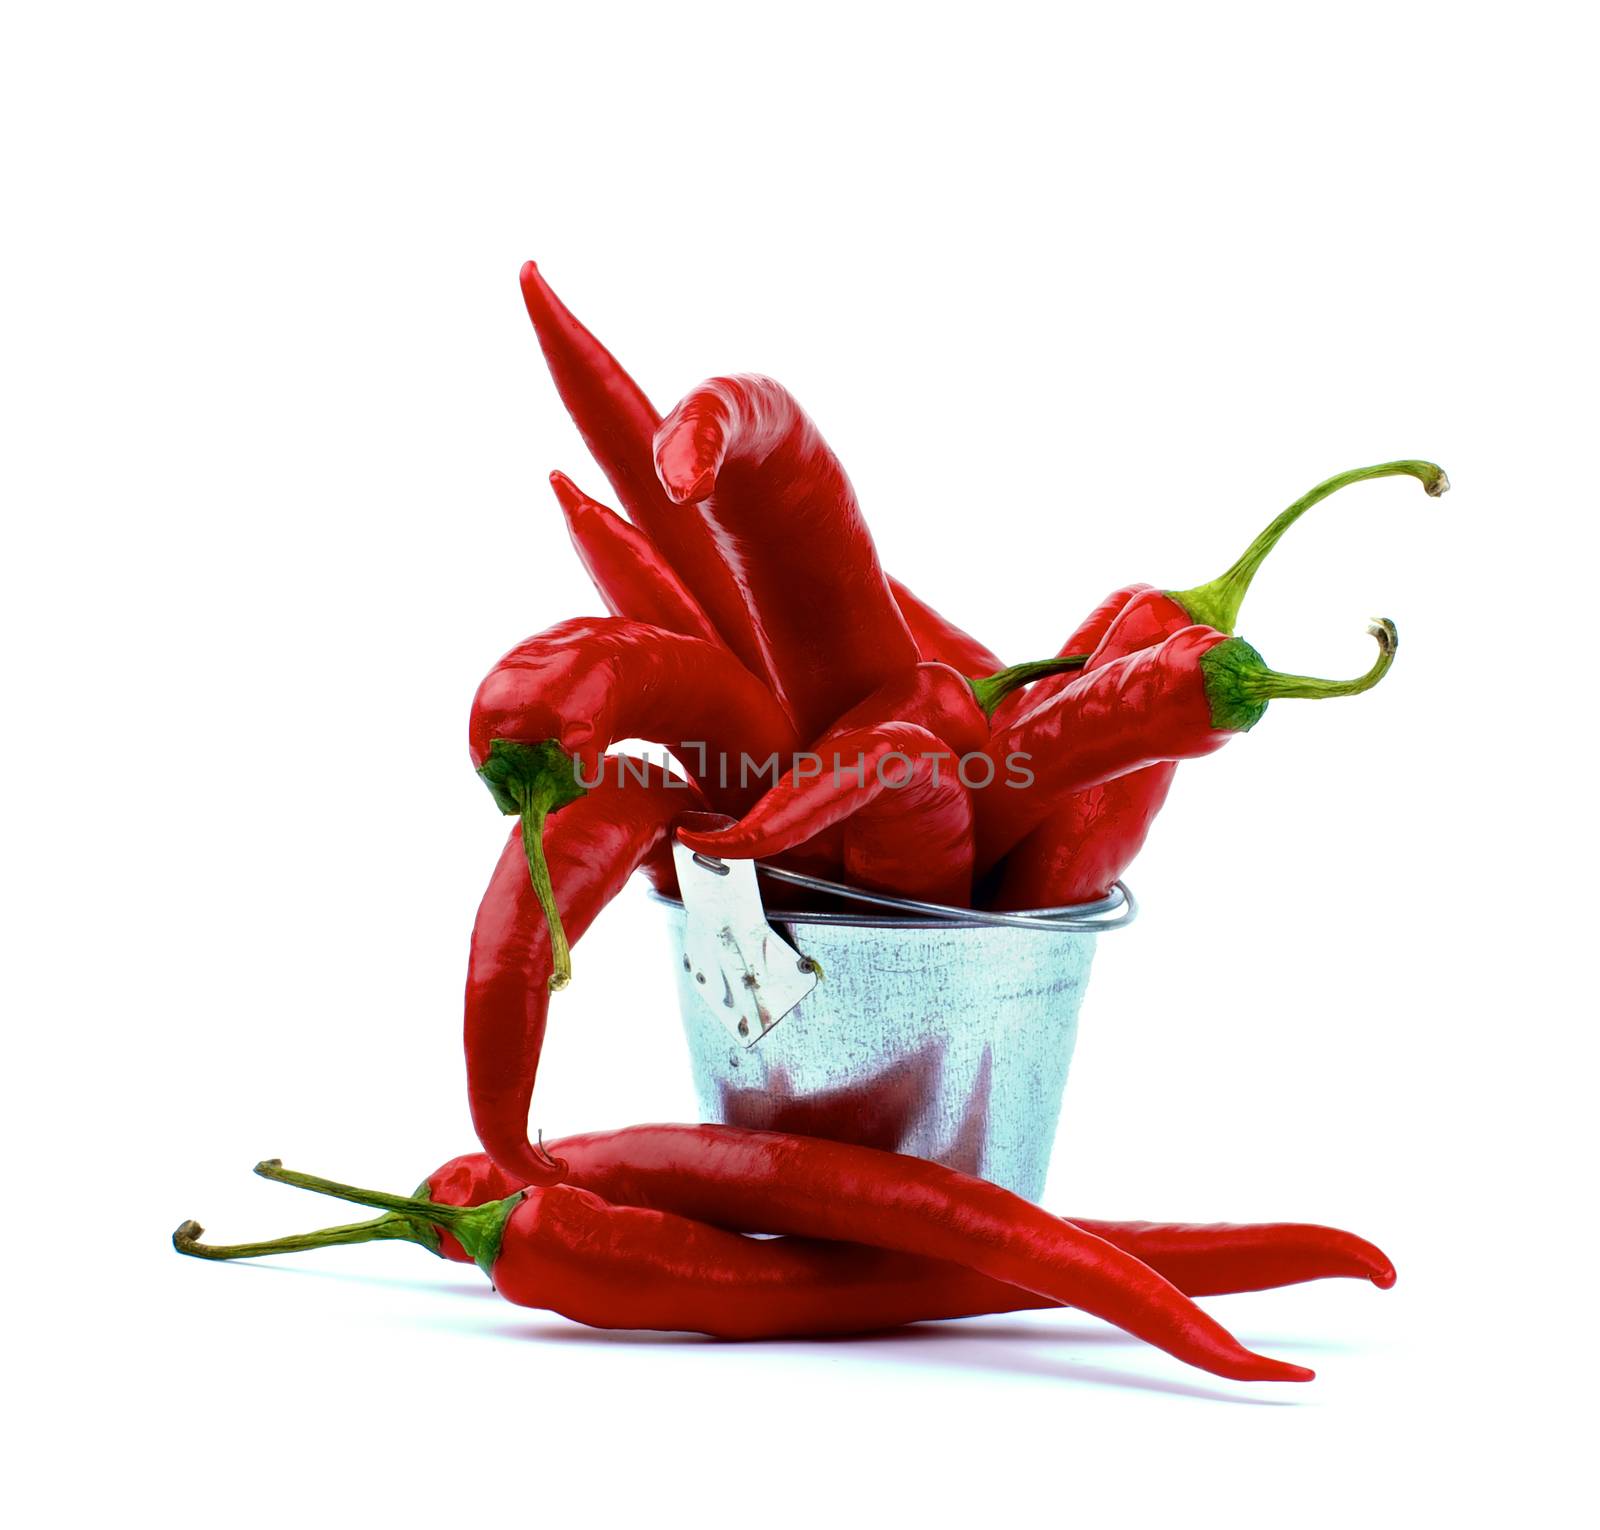 Chili Peppers by zhekos